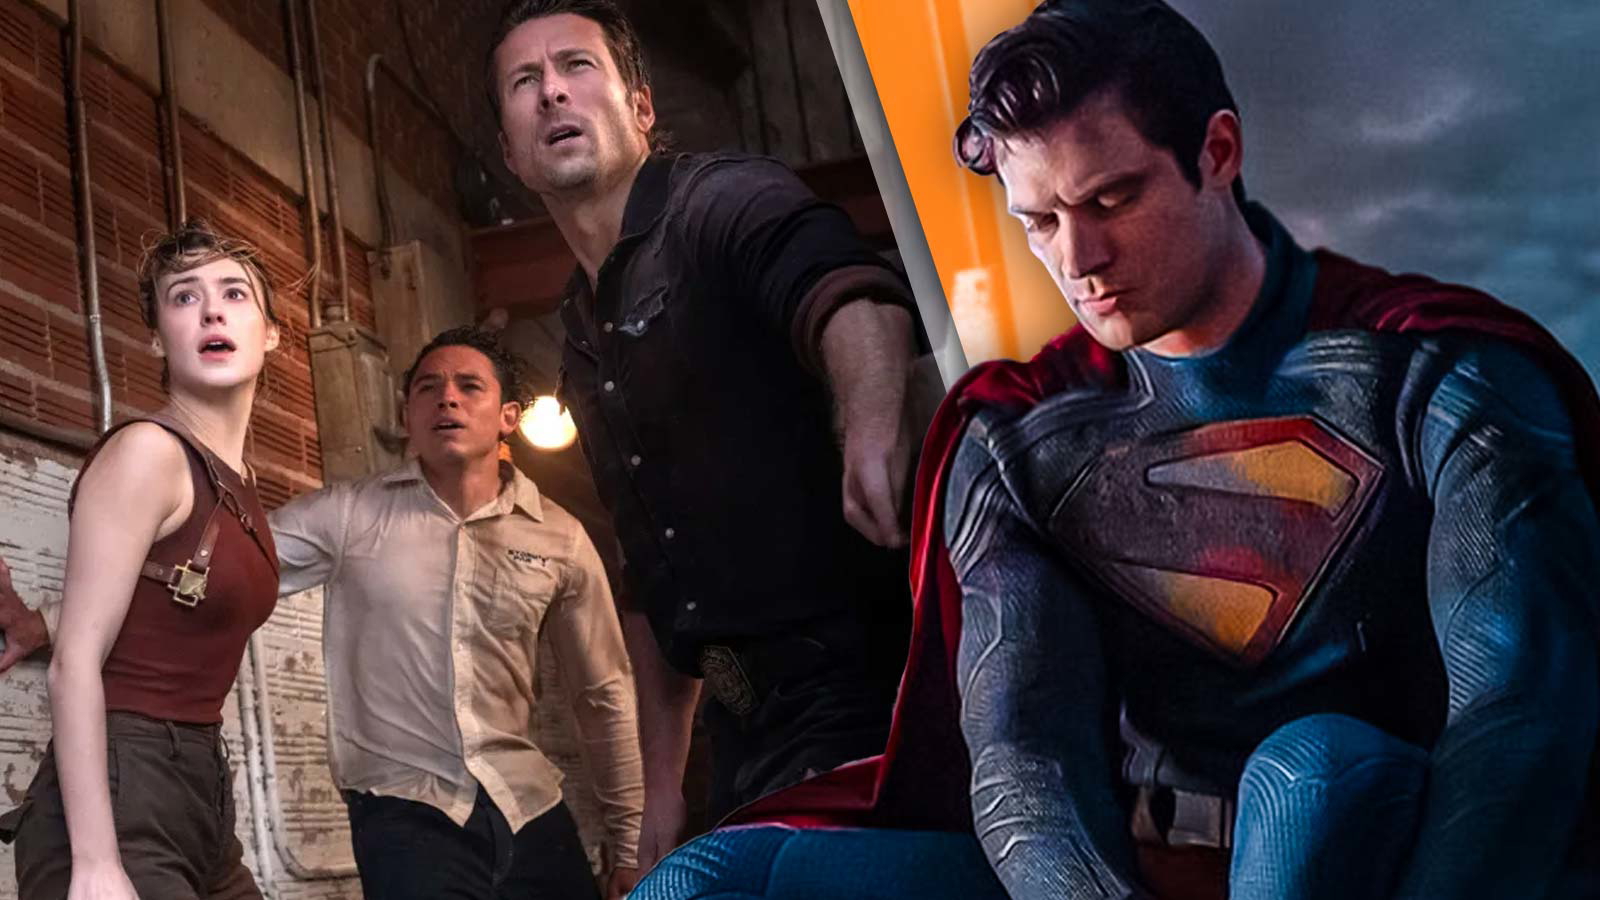 “We have it on camera of us all freaking out”: David Corenswet’s Superman Casting Arrived in the Middle of a ‘Twisters’ Scene